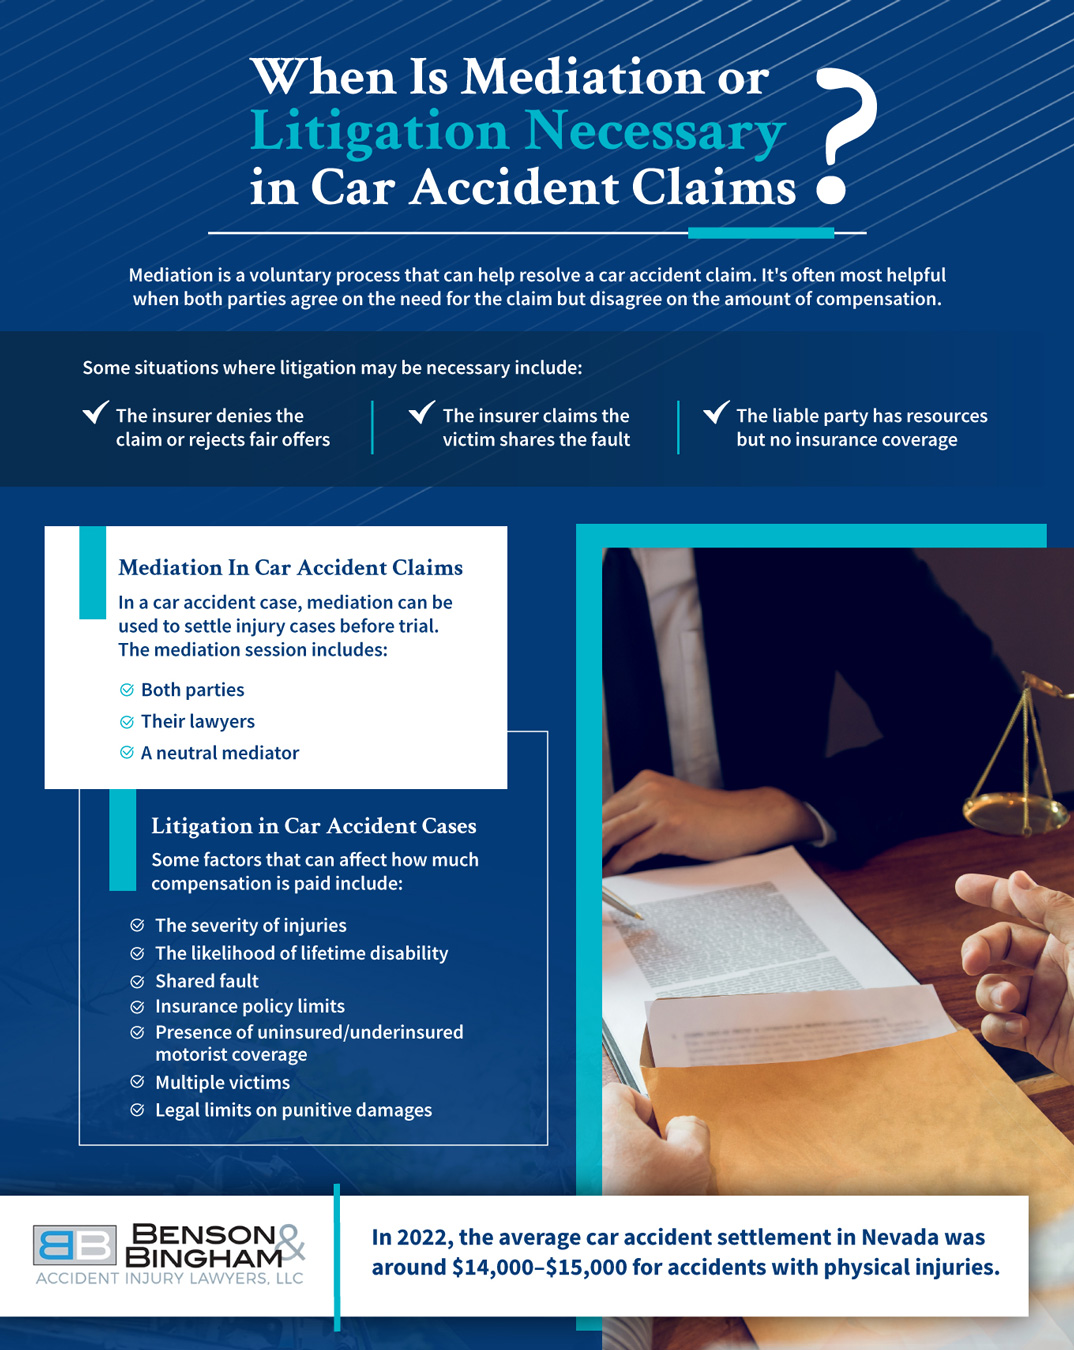 An infographic that shows when mediation or litigation is necessary in car accident claims